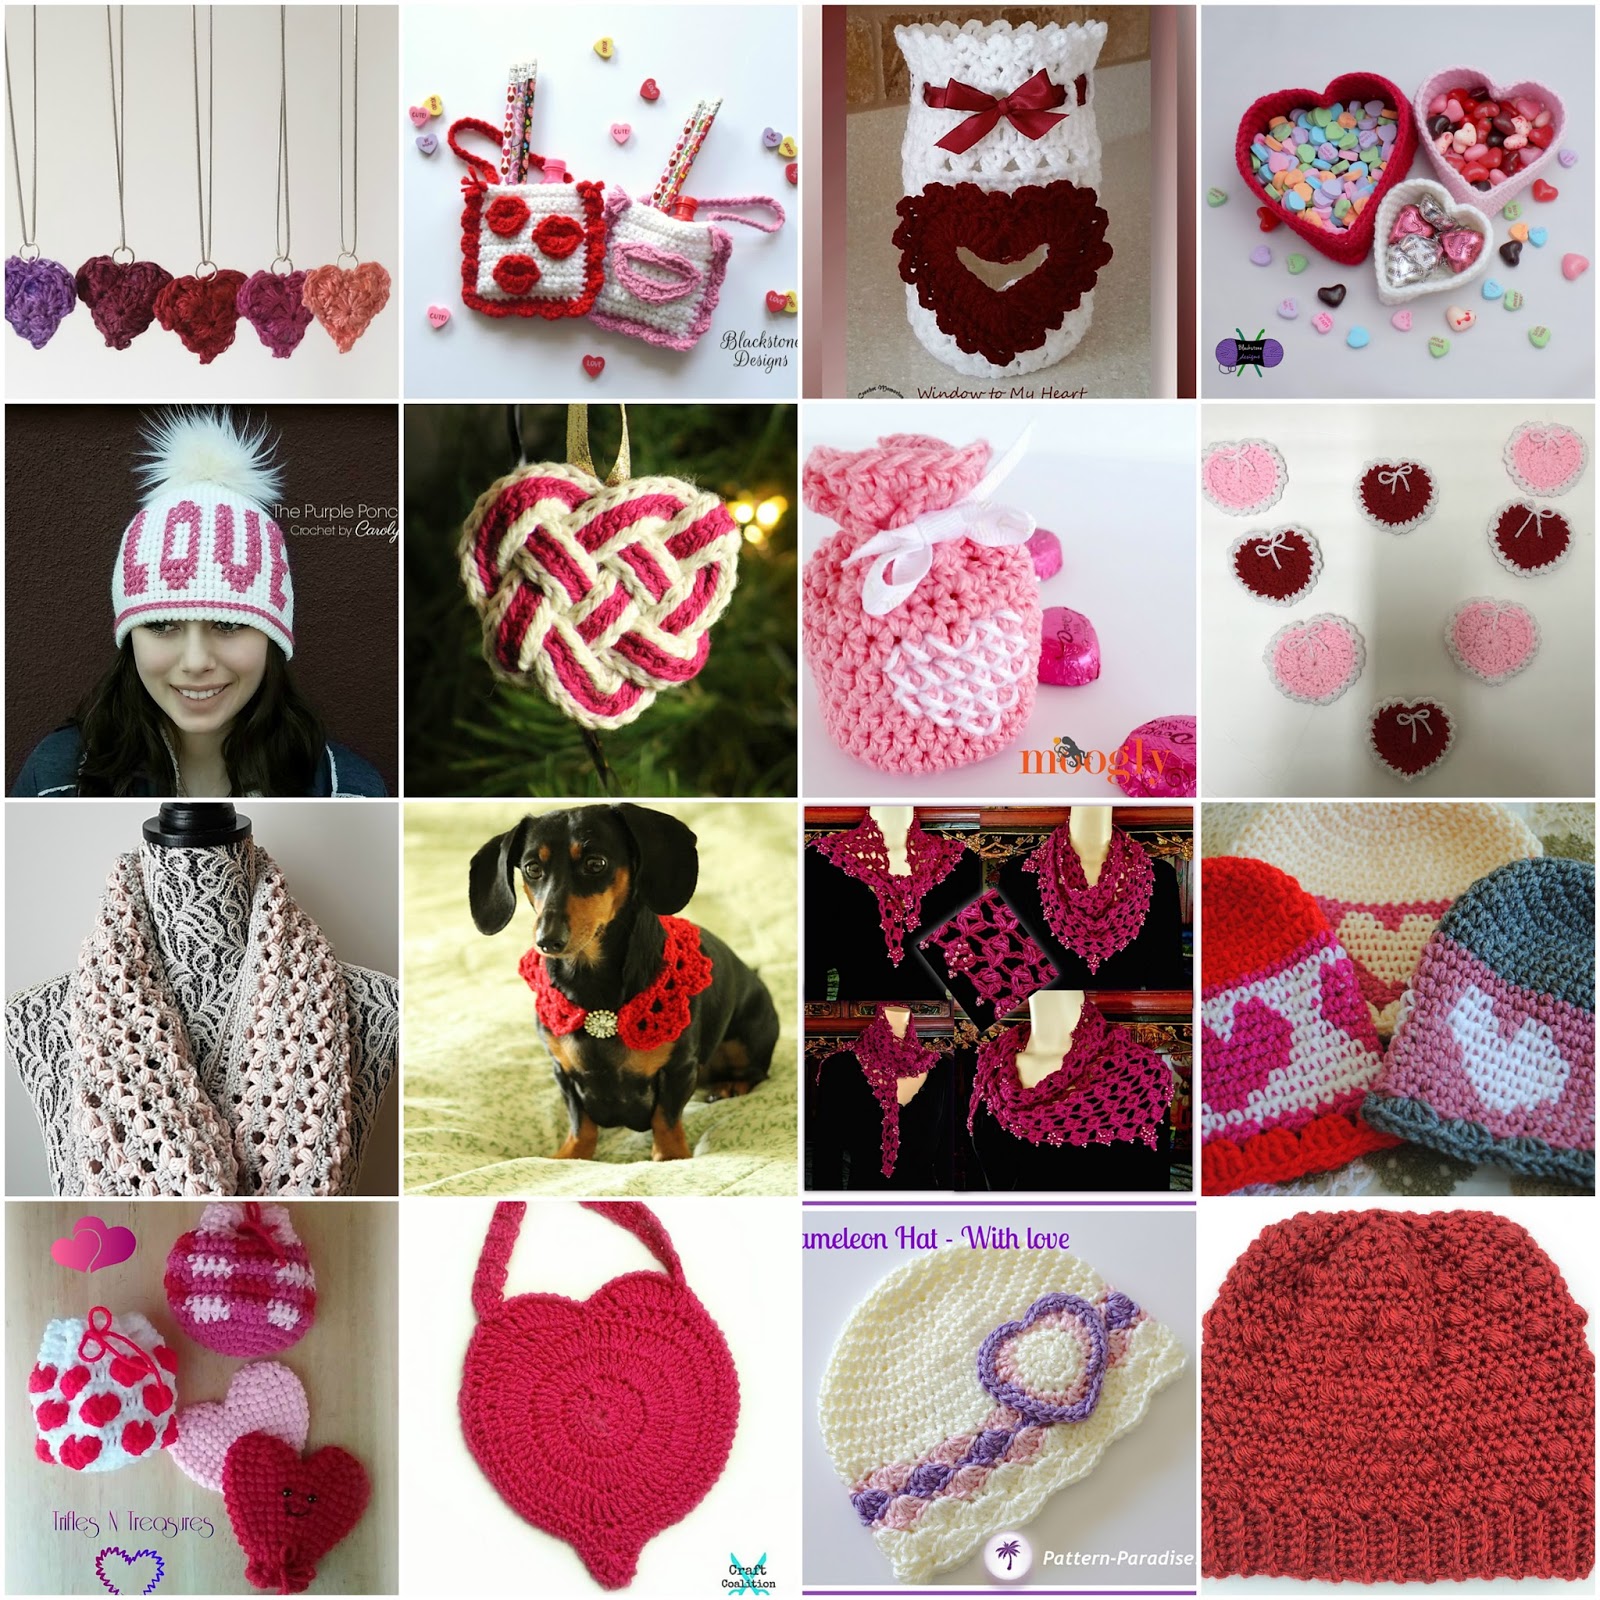 CGOA Now!: 16 (Mostly Free) Crochet Patterns for Valetine's Day Gifts